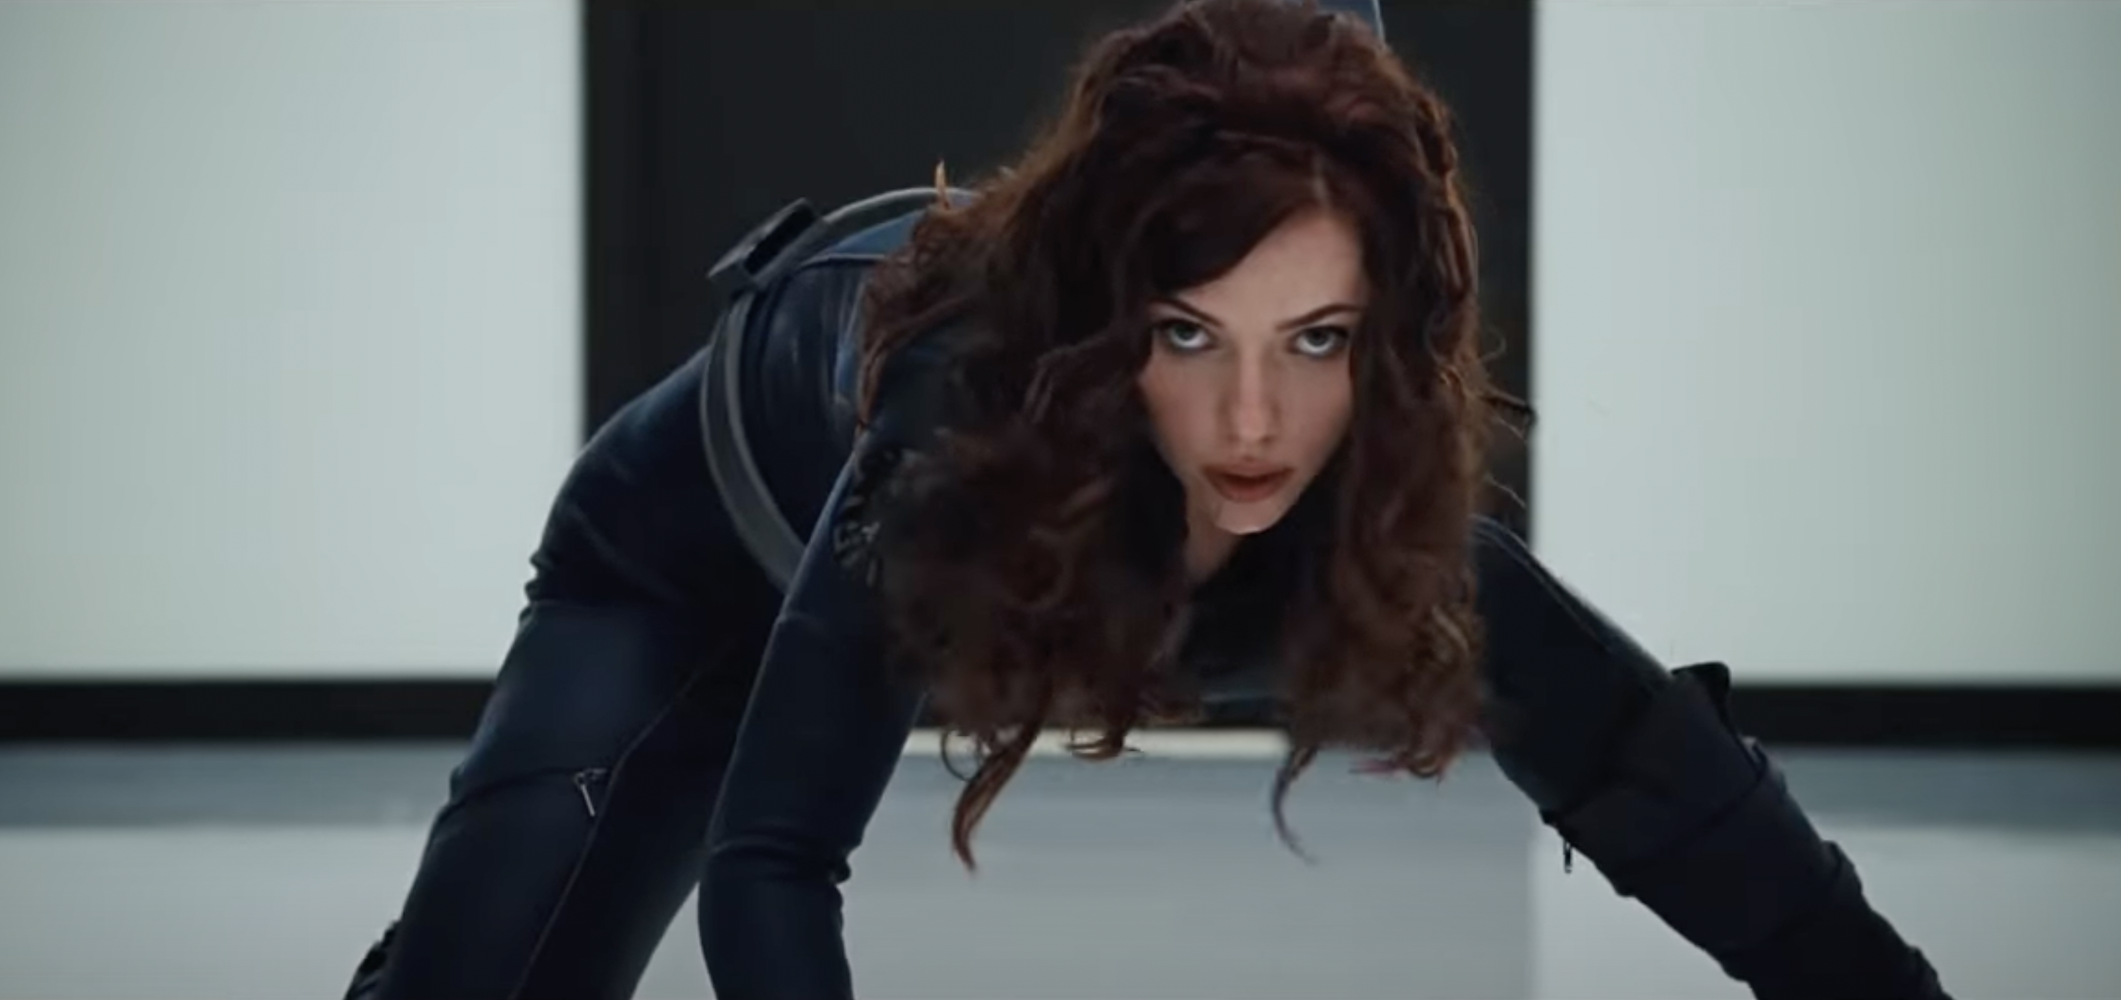 closeup of scarlett in the movie, crouching down